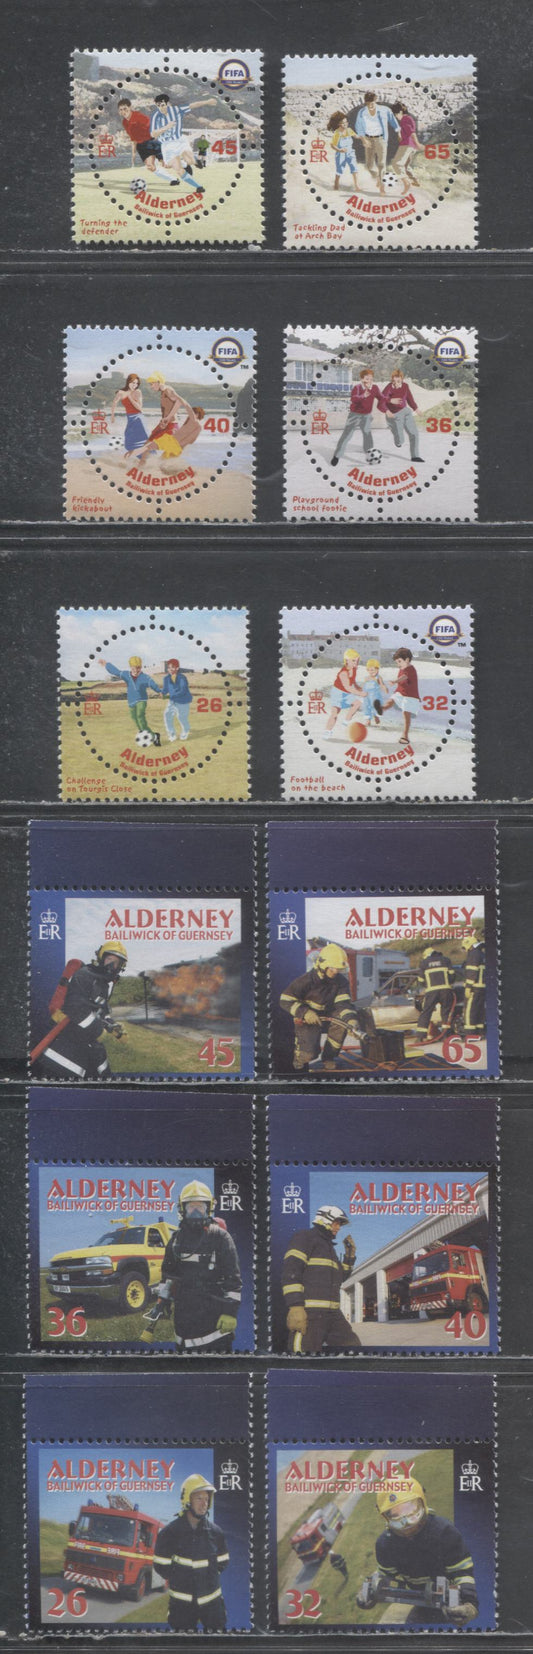 Lot 217 Alderney SC#227/244 2004 FIFA & Fire Services Issues, 12 VFNH Singles, Click on Listing to See ALL Pictures, 2017 Scott Cat. $19